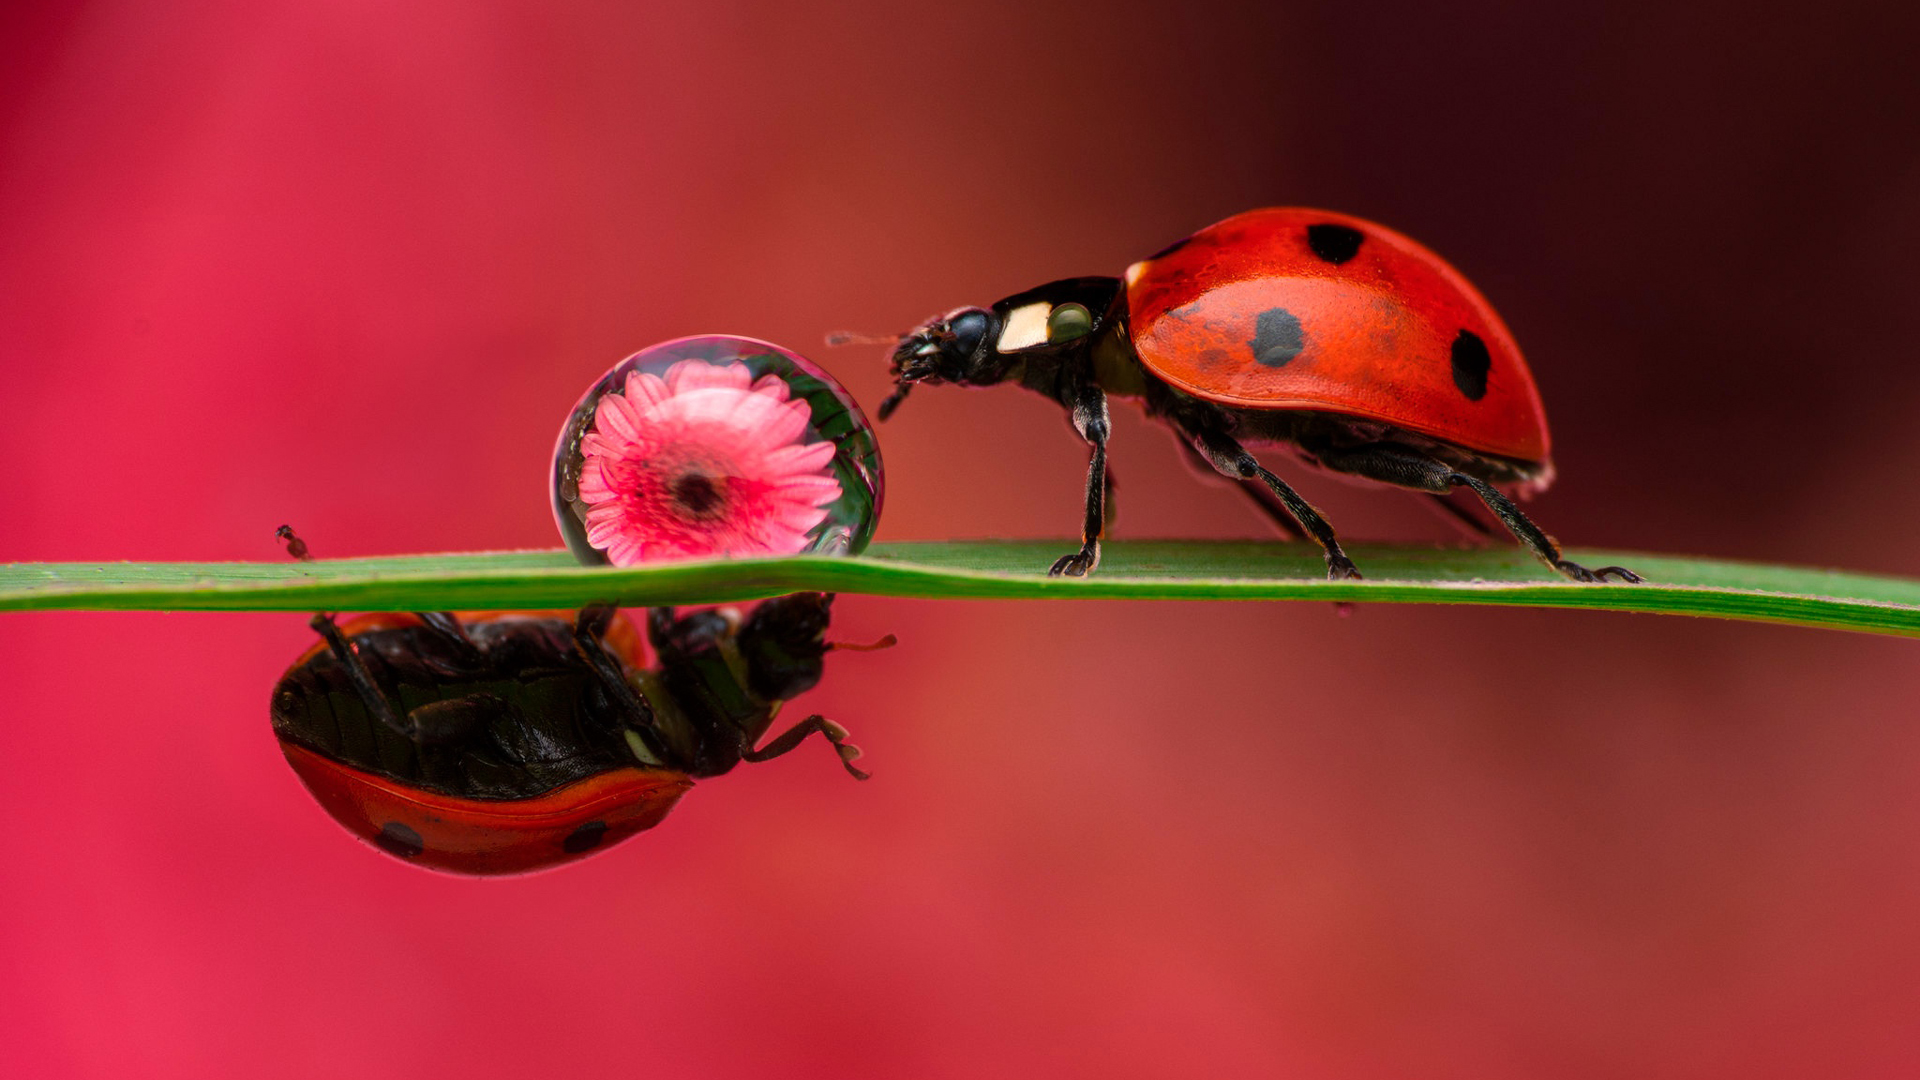 Red Insect Ladybug On Green Leaf In Red Pink Wallpaper HD Animals